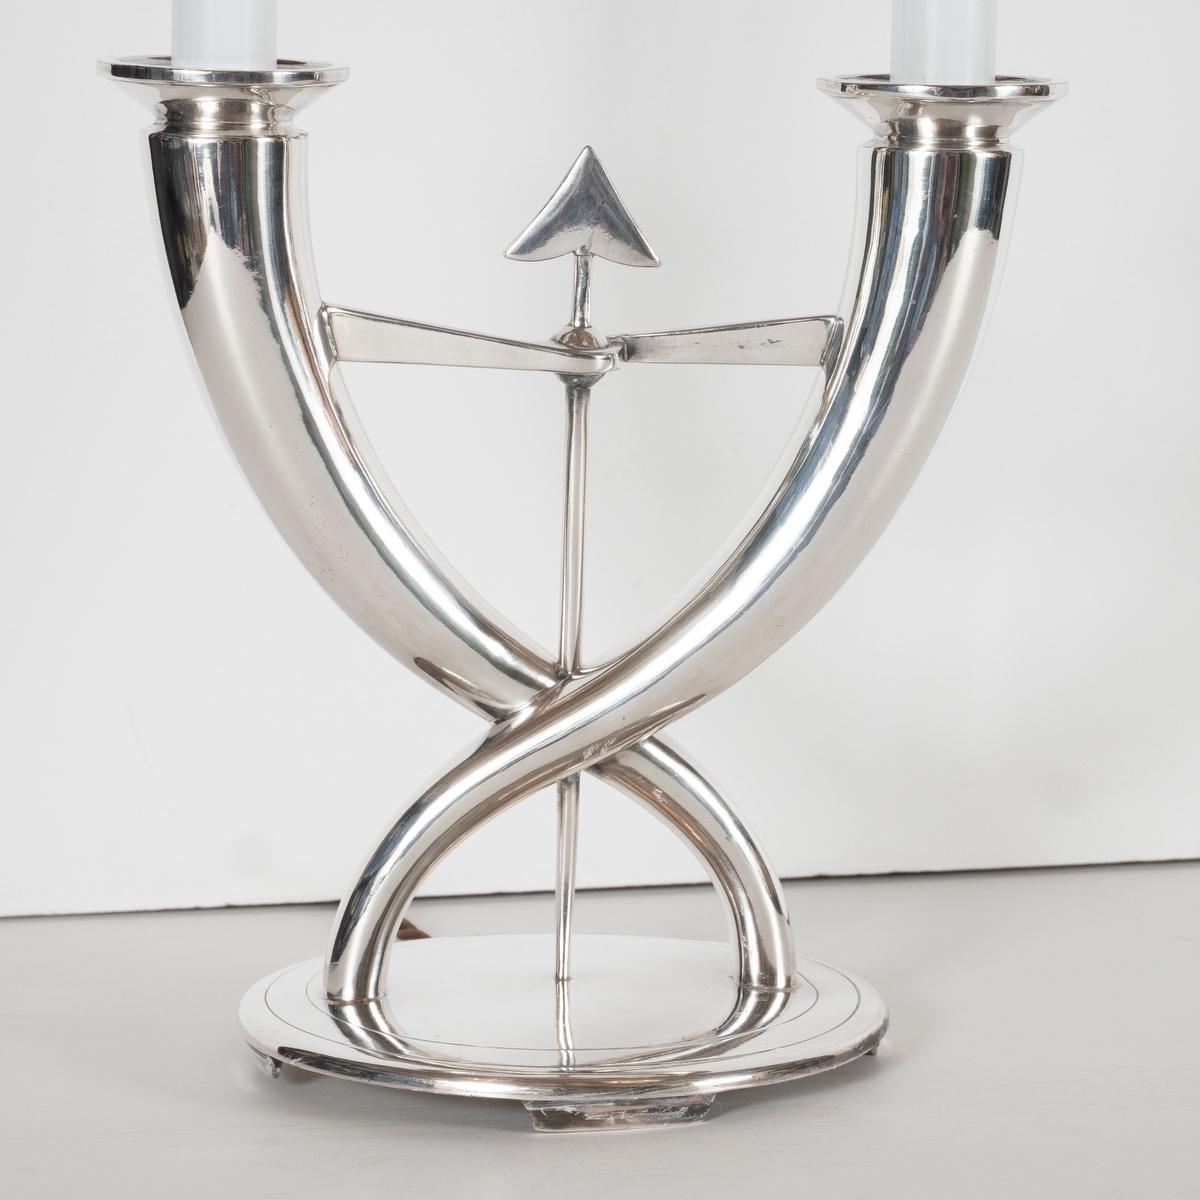 Silver Plate Table Lamp by Gio Ponti for Christofle In Good Condition For Sale In Tarrytown, NY